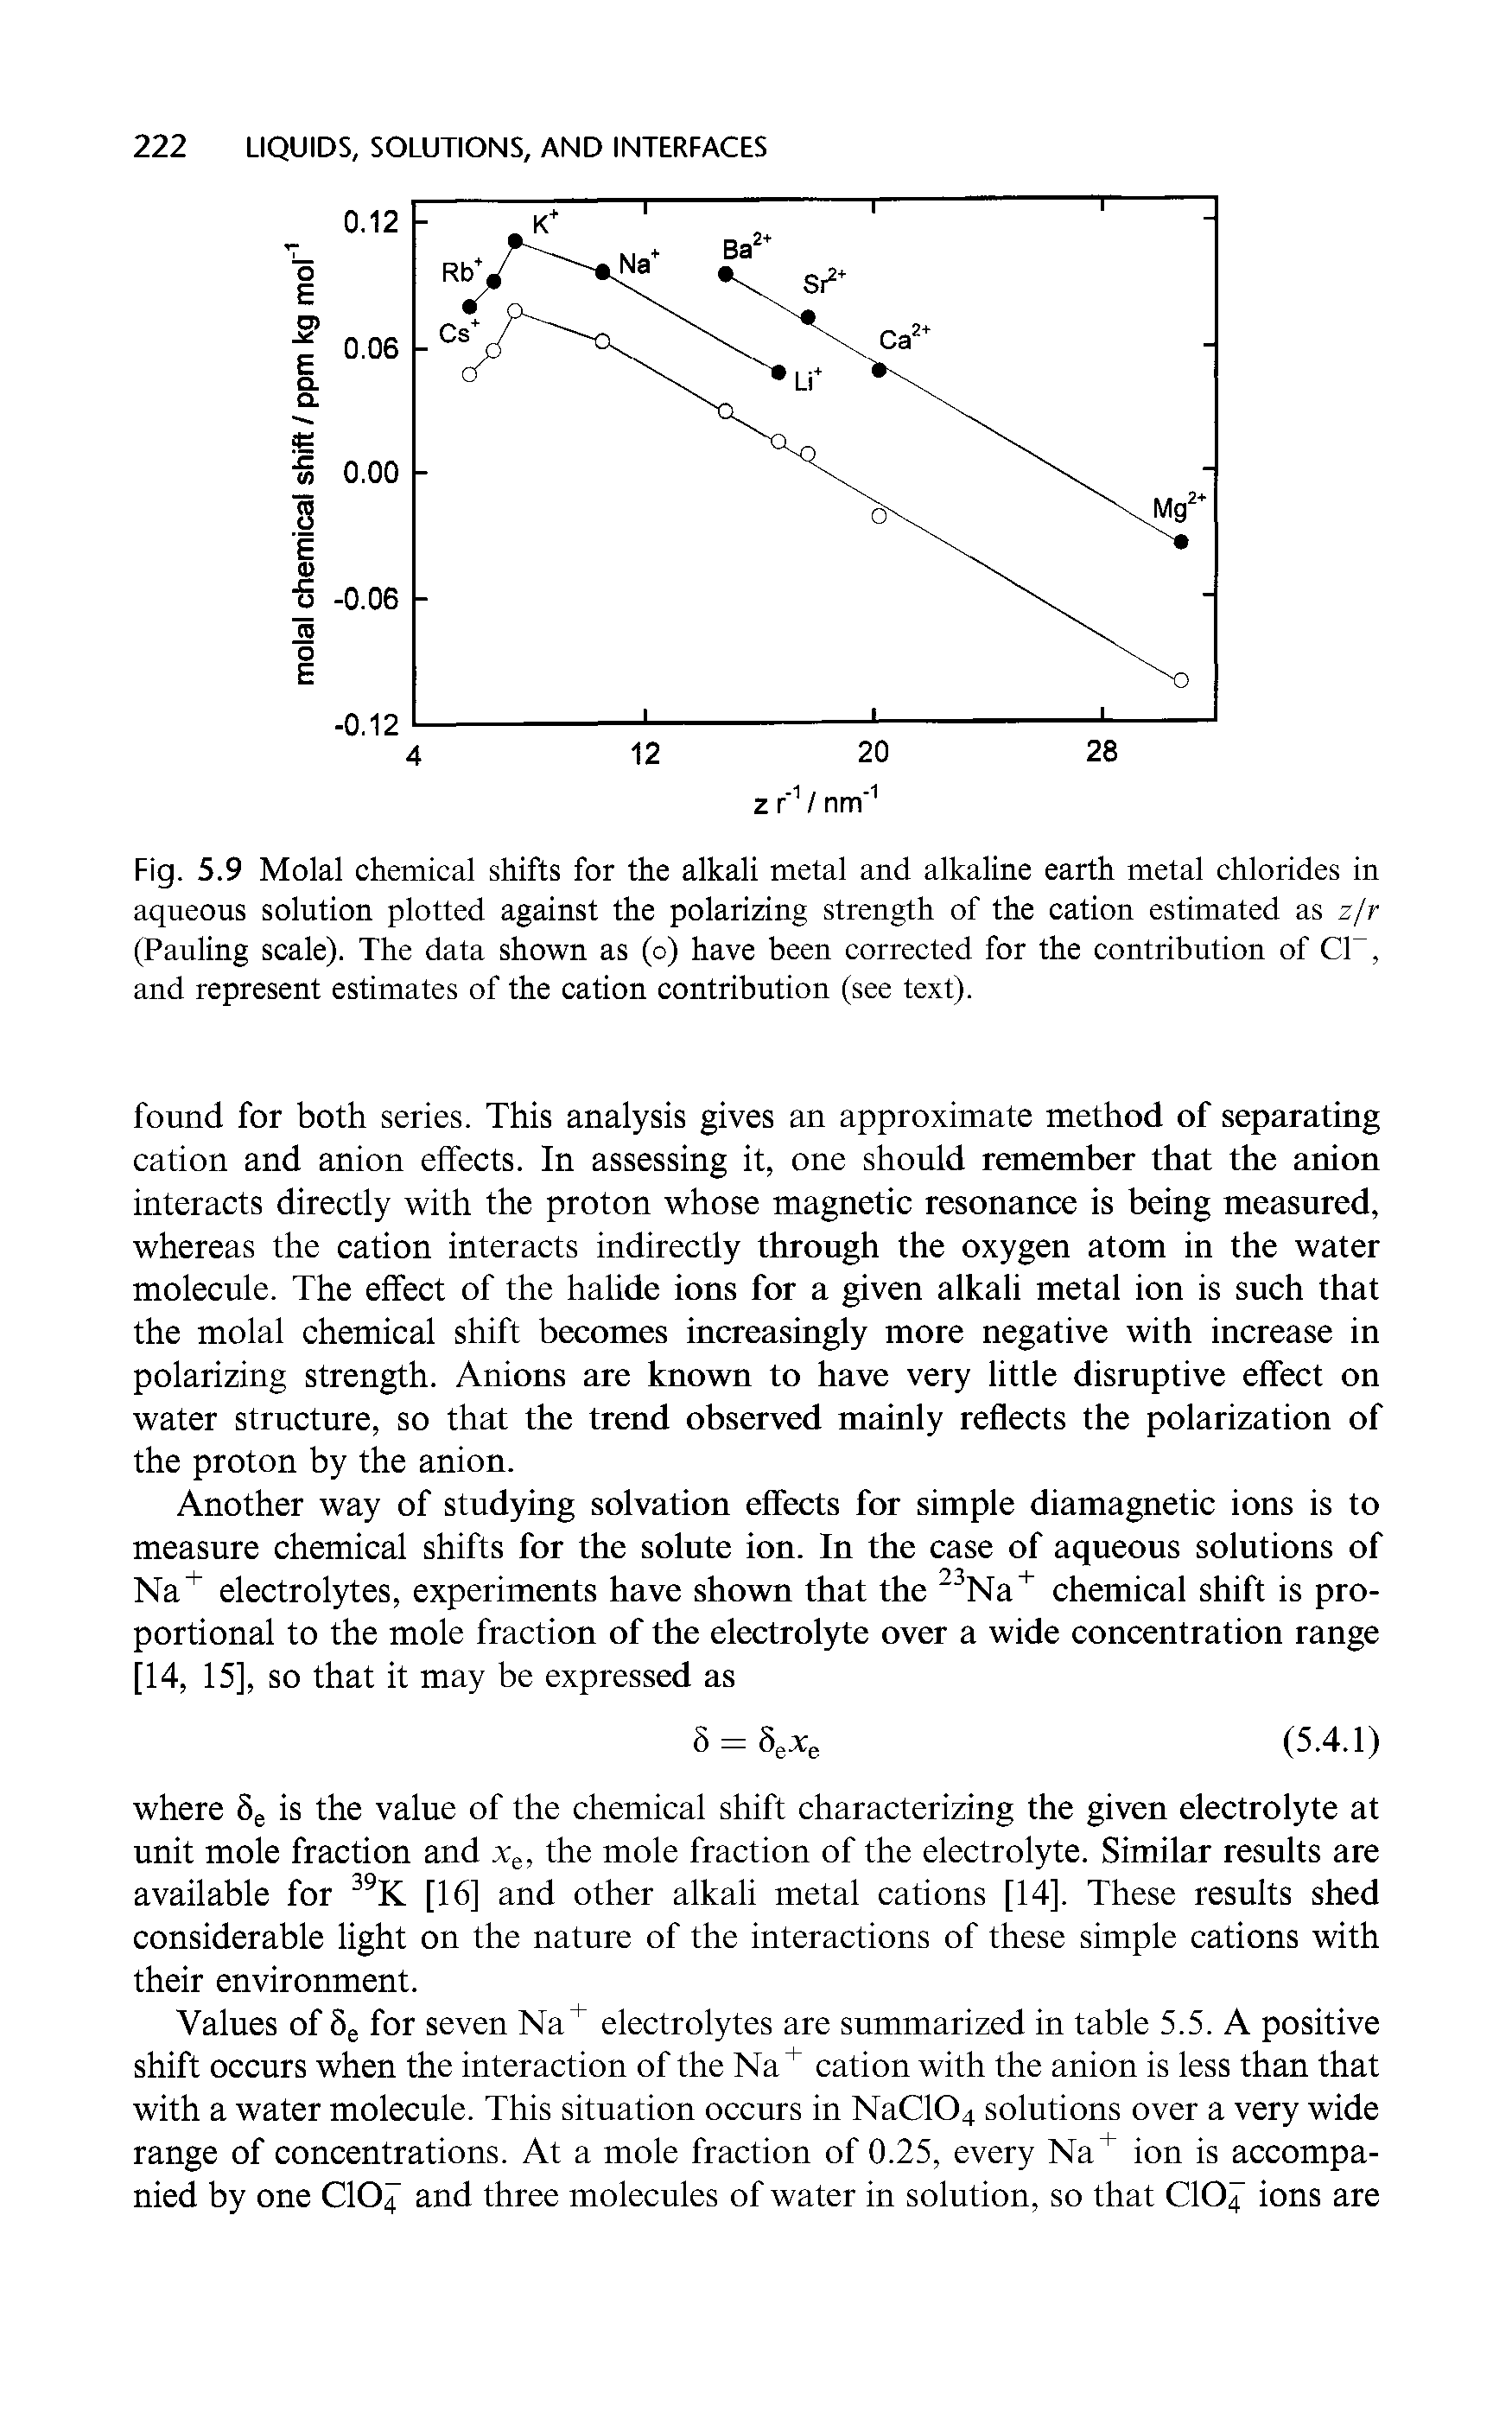 Fig. 5.9 Molal chemical shifts for the alkali metal and alkaline earth metal chlorides in aqueous solution plotted against the polarizing strength of the cation estimated as zjr (Pauling scale). The data shown as (o) have been corrected for the contribution of CP, and represent estimates of the cation contribution (see text).